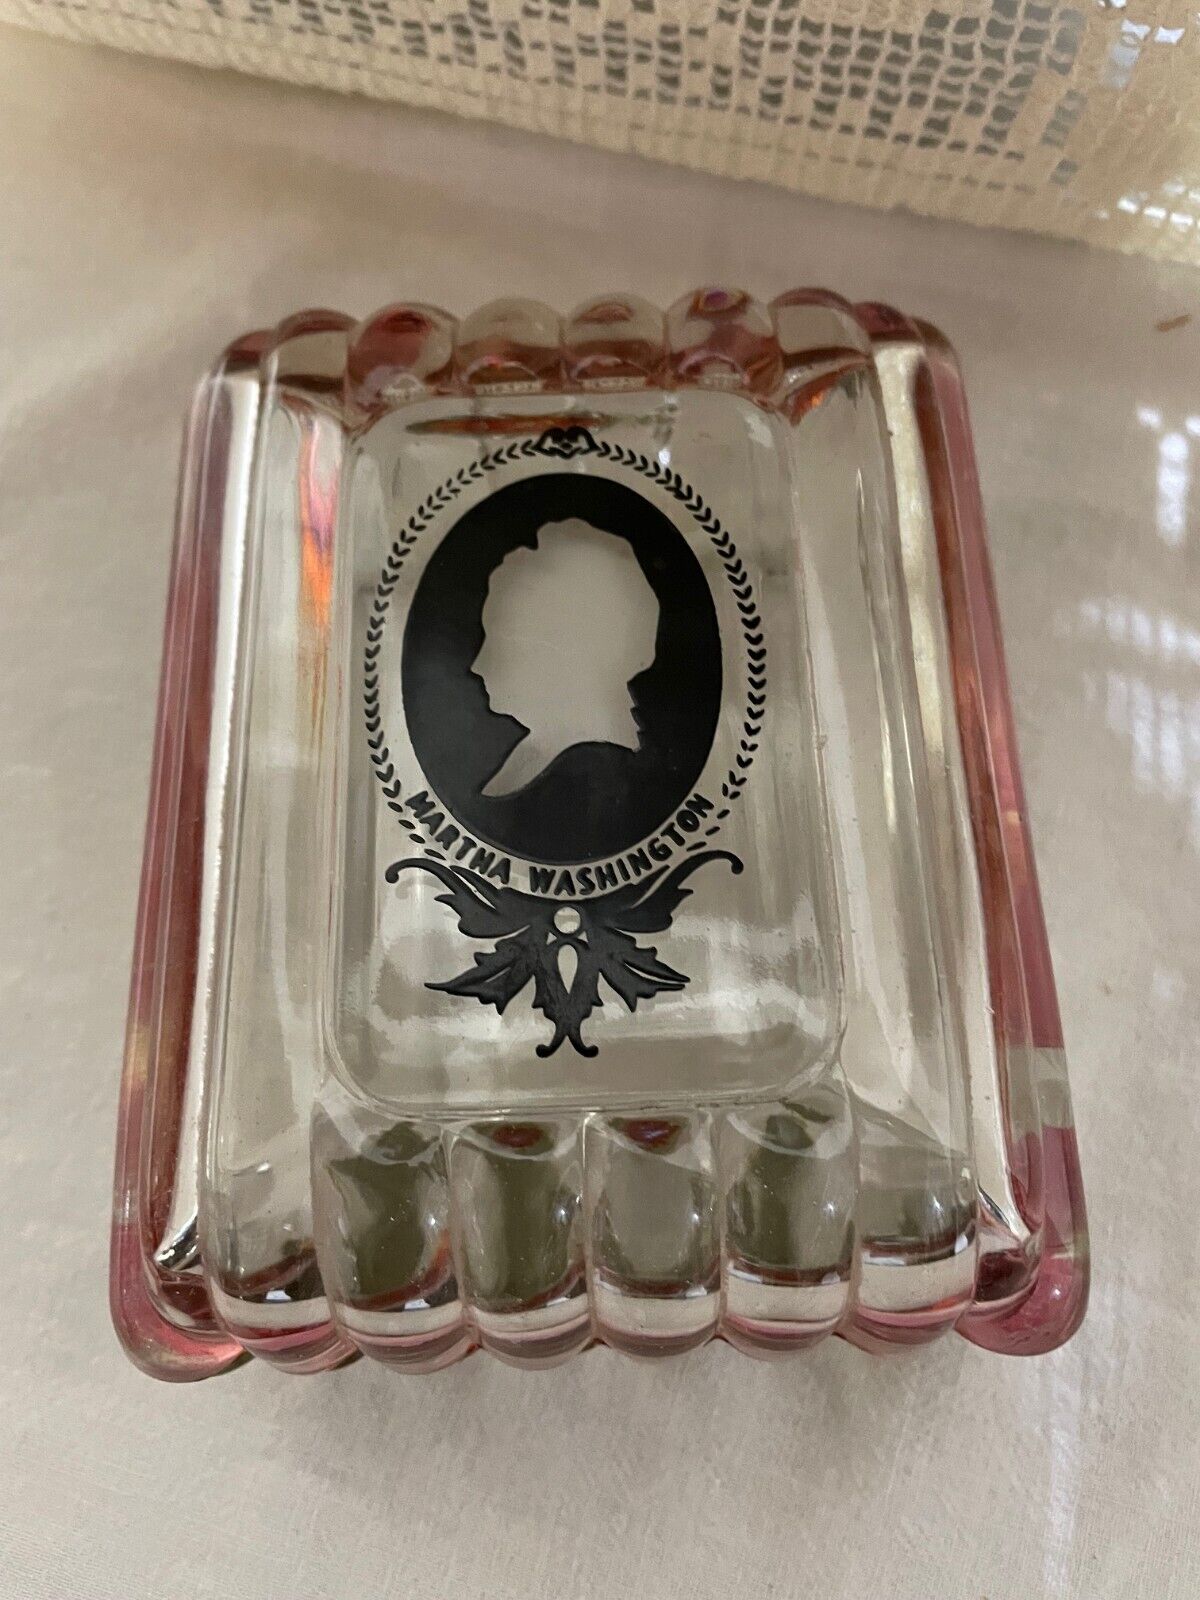 Extremaly Rare Martha Washington Cameo Glass with cover rose edged lid 